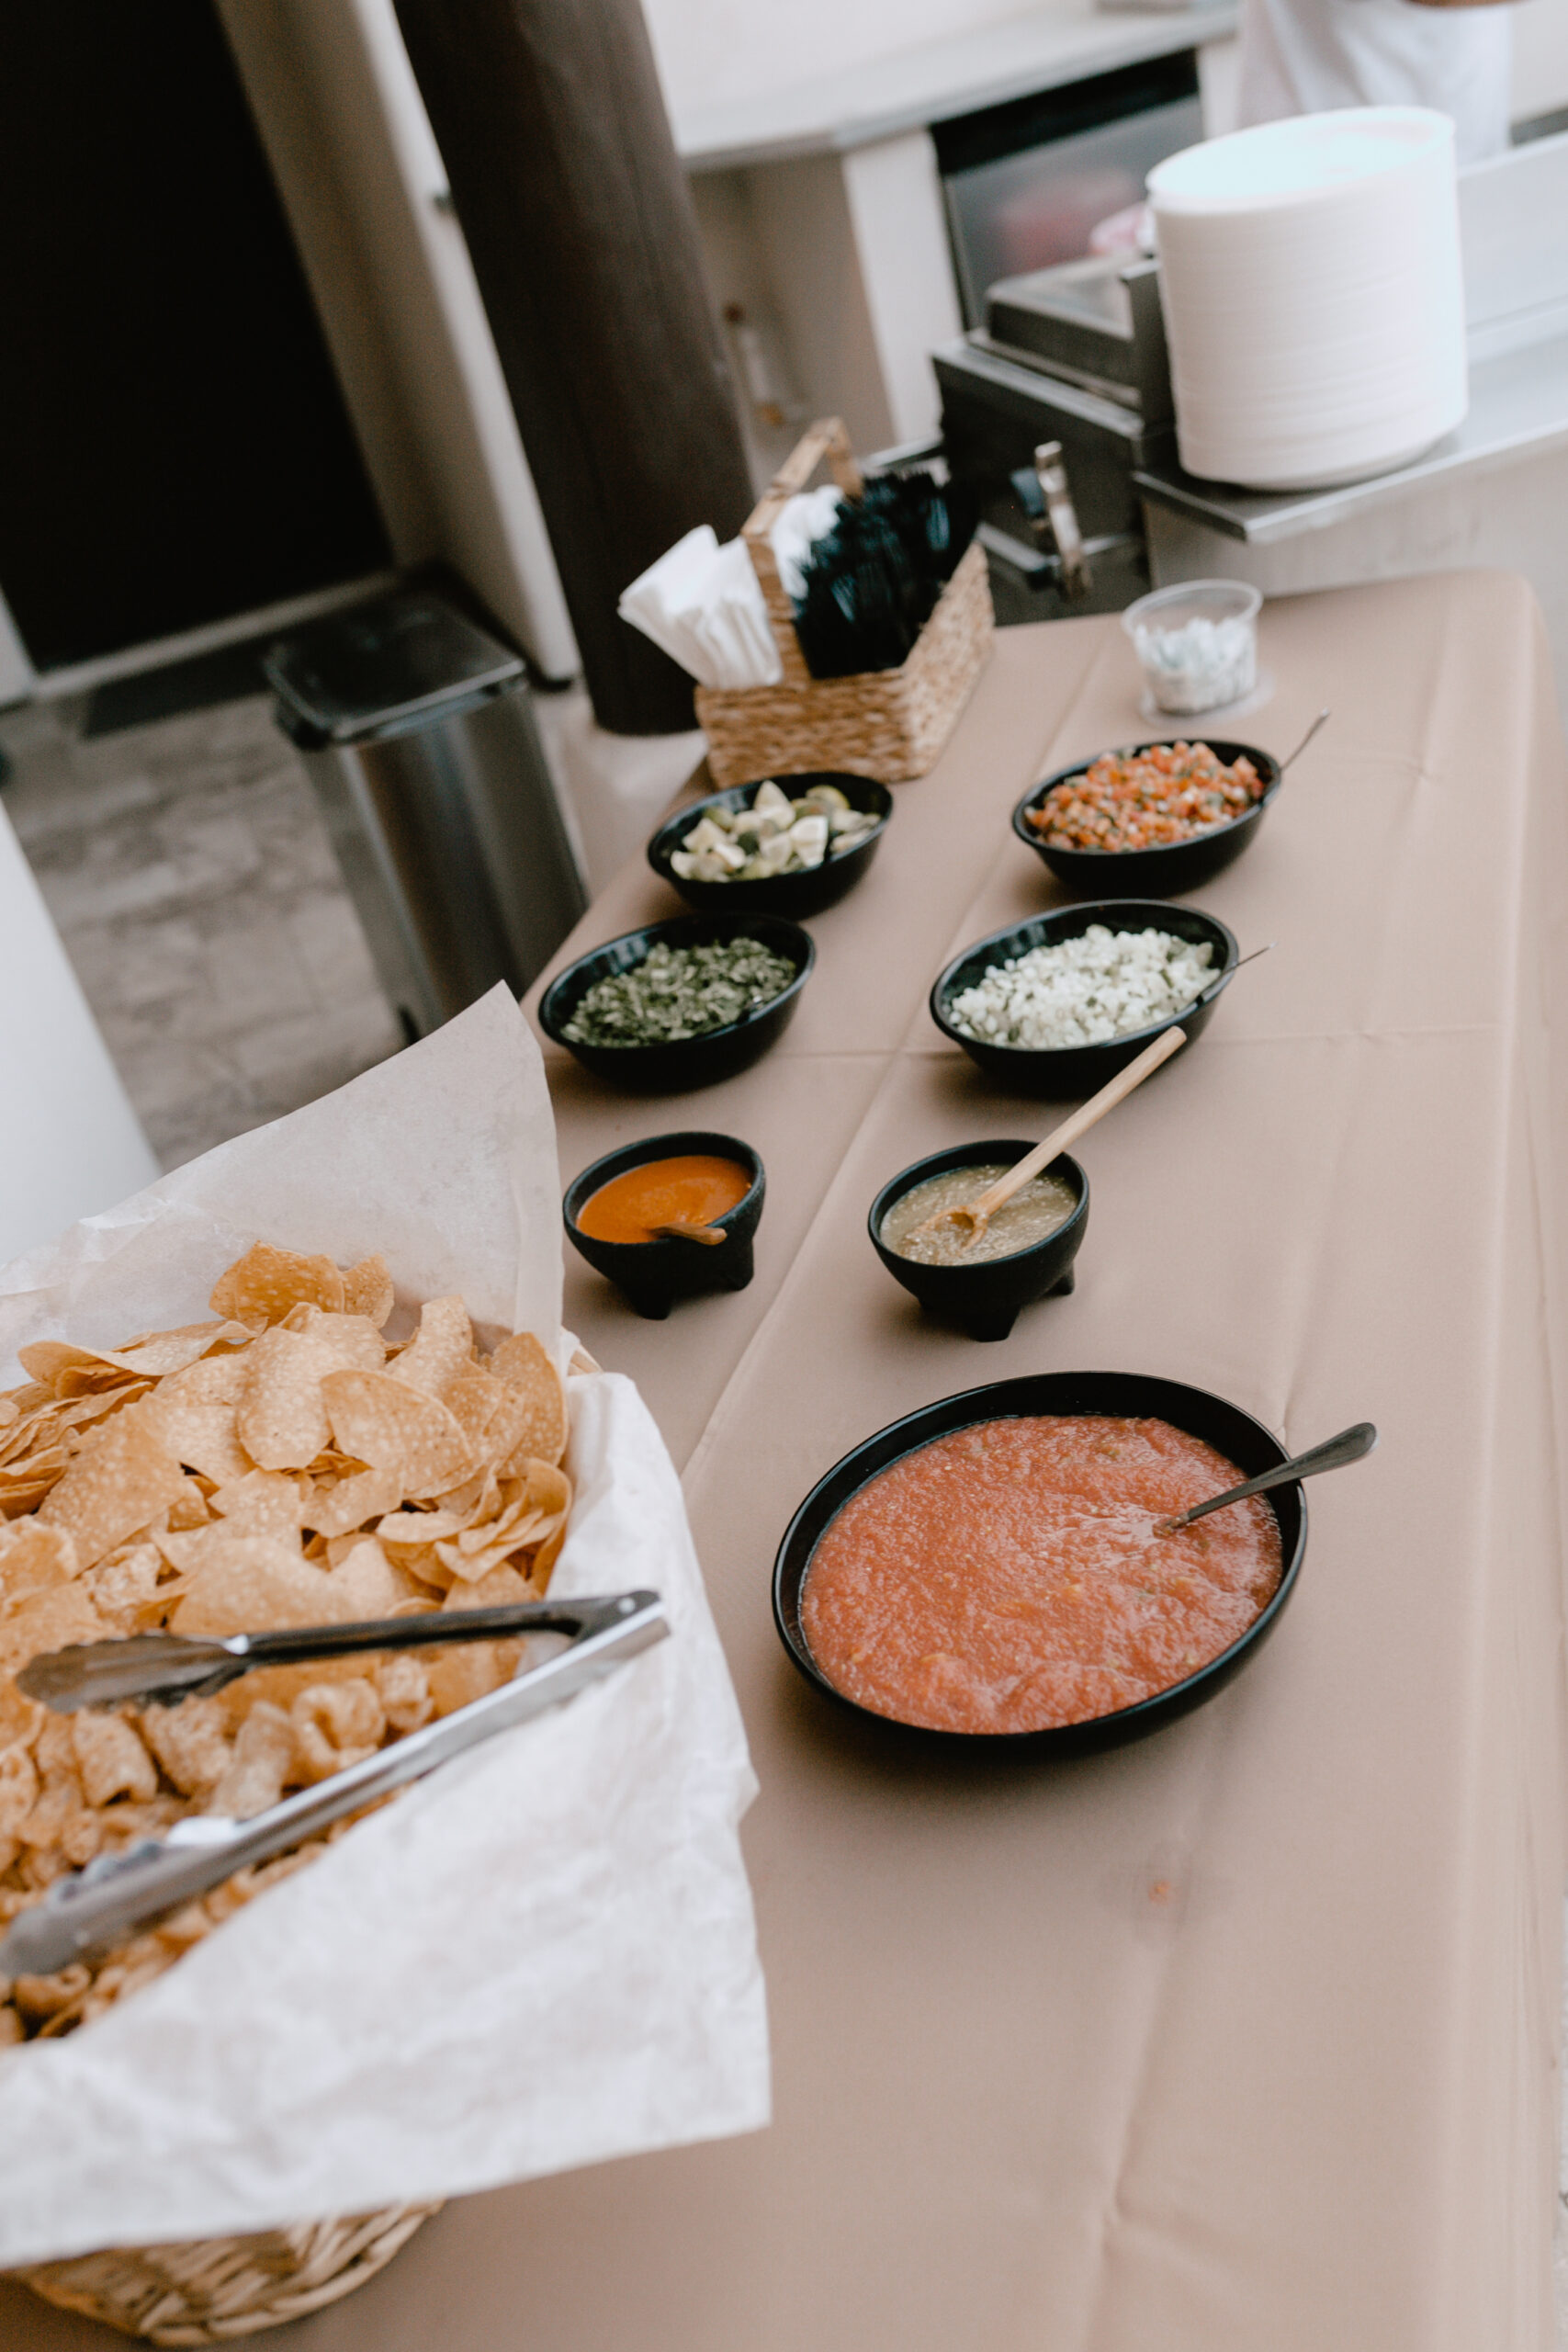 salsa bar for our taco stand #surpriseparty #mobiletacostand #phoenixfood